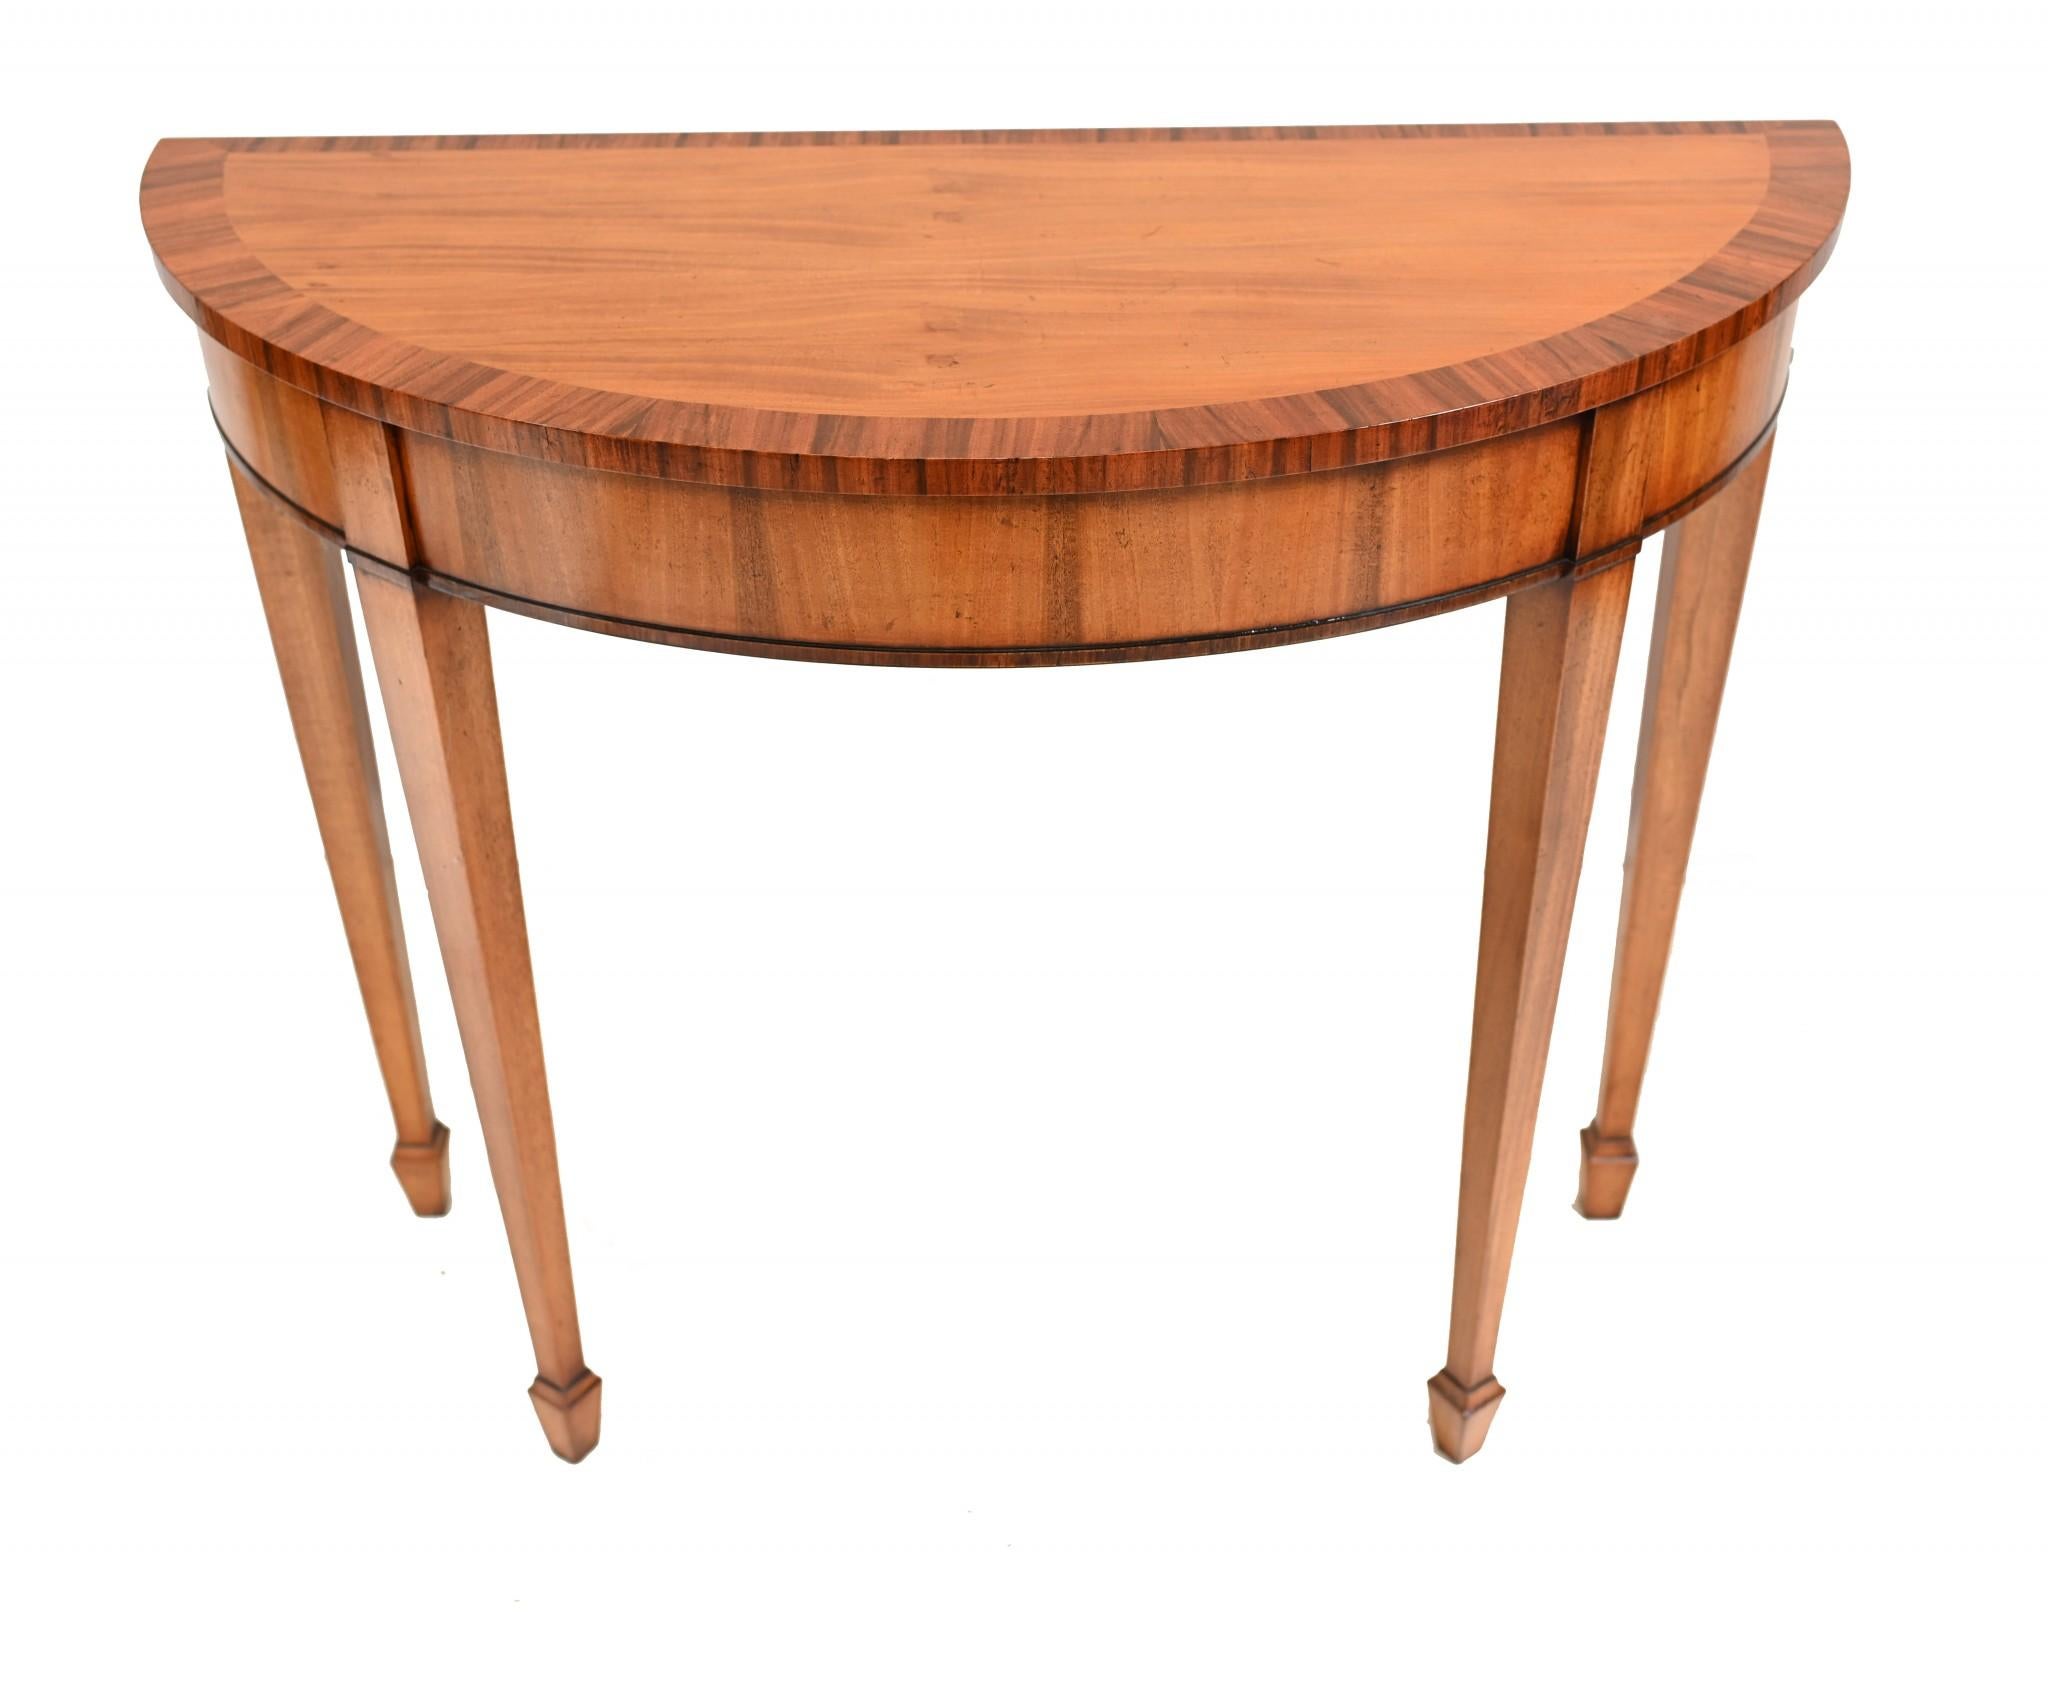 Pair of satinwood demi lune console tables in the Regency manner
Such an elegant and refined design with the tapered legs
Classic piece of furniture great for any interior
Offered in great shape ready for home use right away
We ship to every